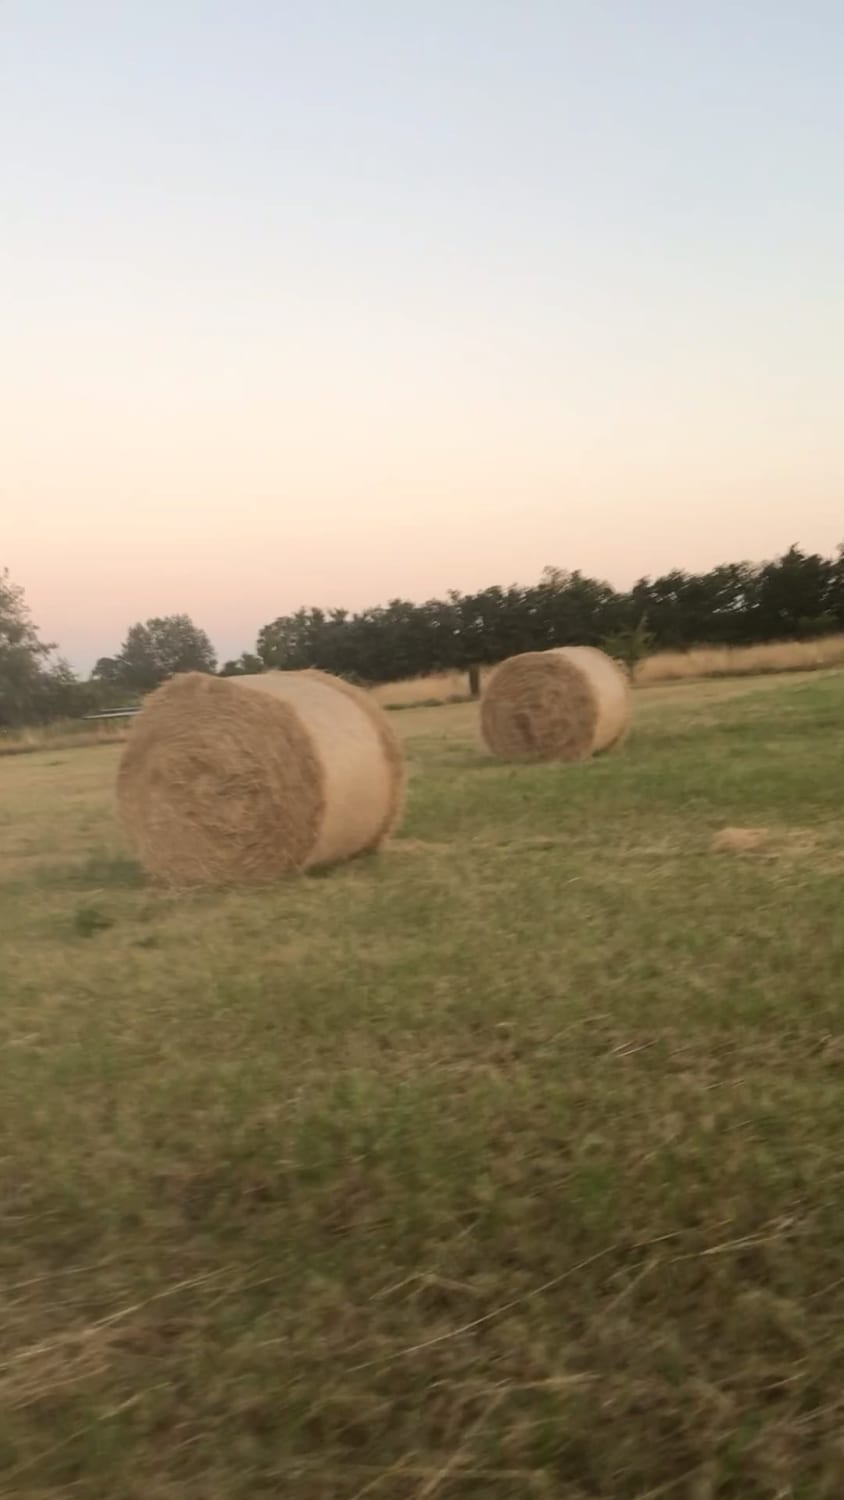 When the bales have Been wrapped